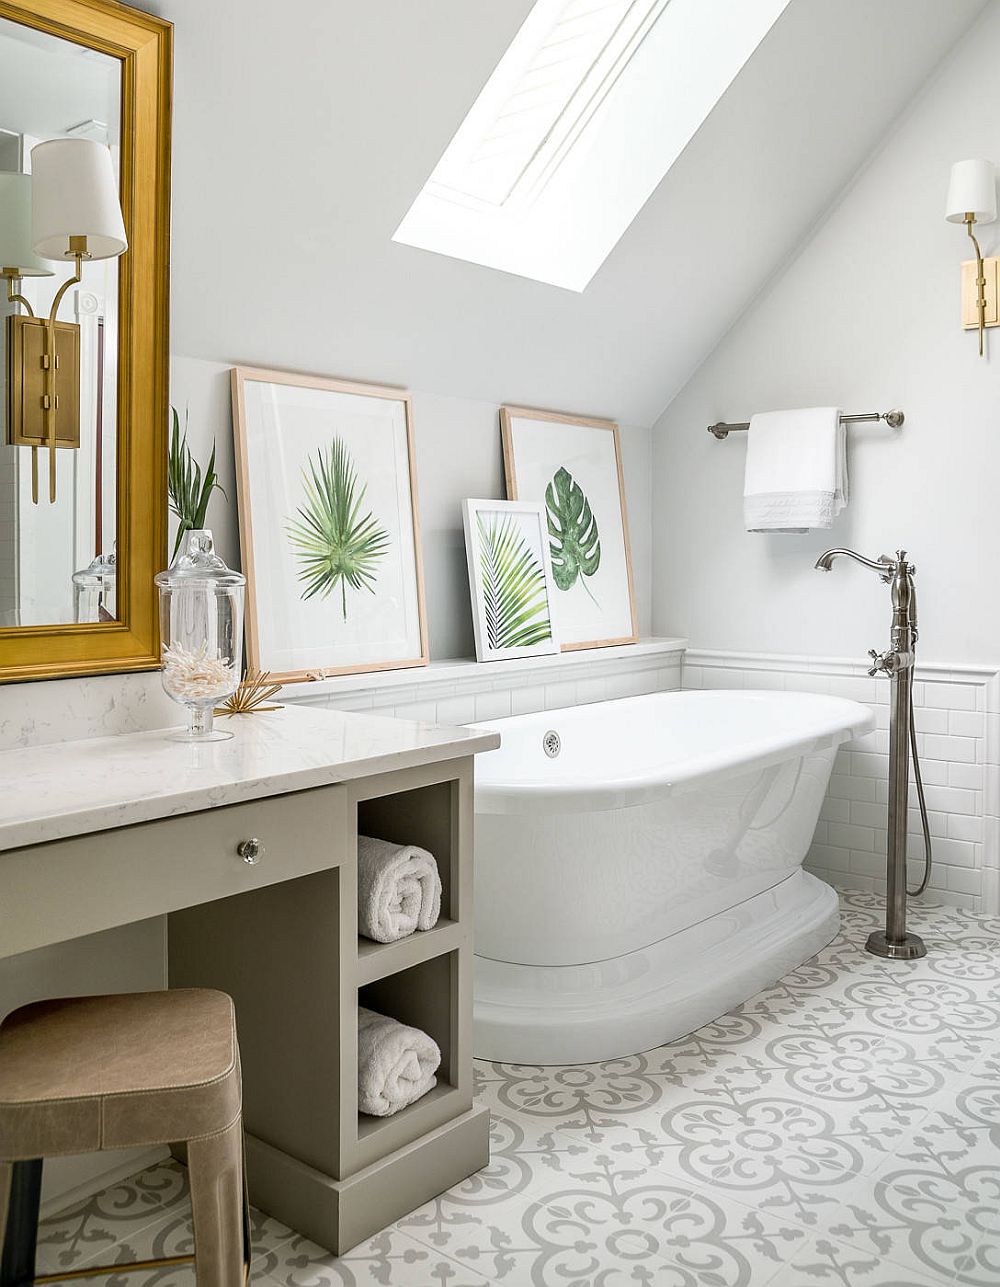 Brilliant-use-of-framed-botanicals-on-a-ledge-next-to-the-freestanding-bathtub-in-the-revamped-attic-bathroom-58260